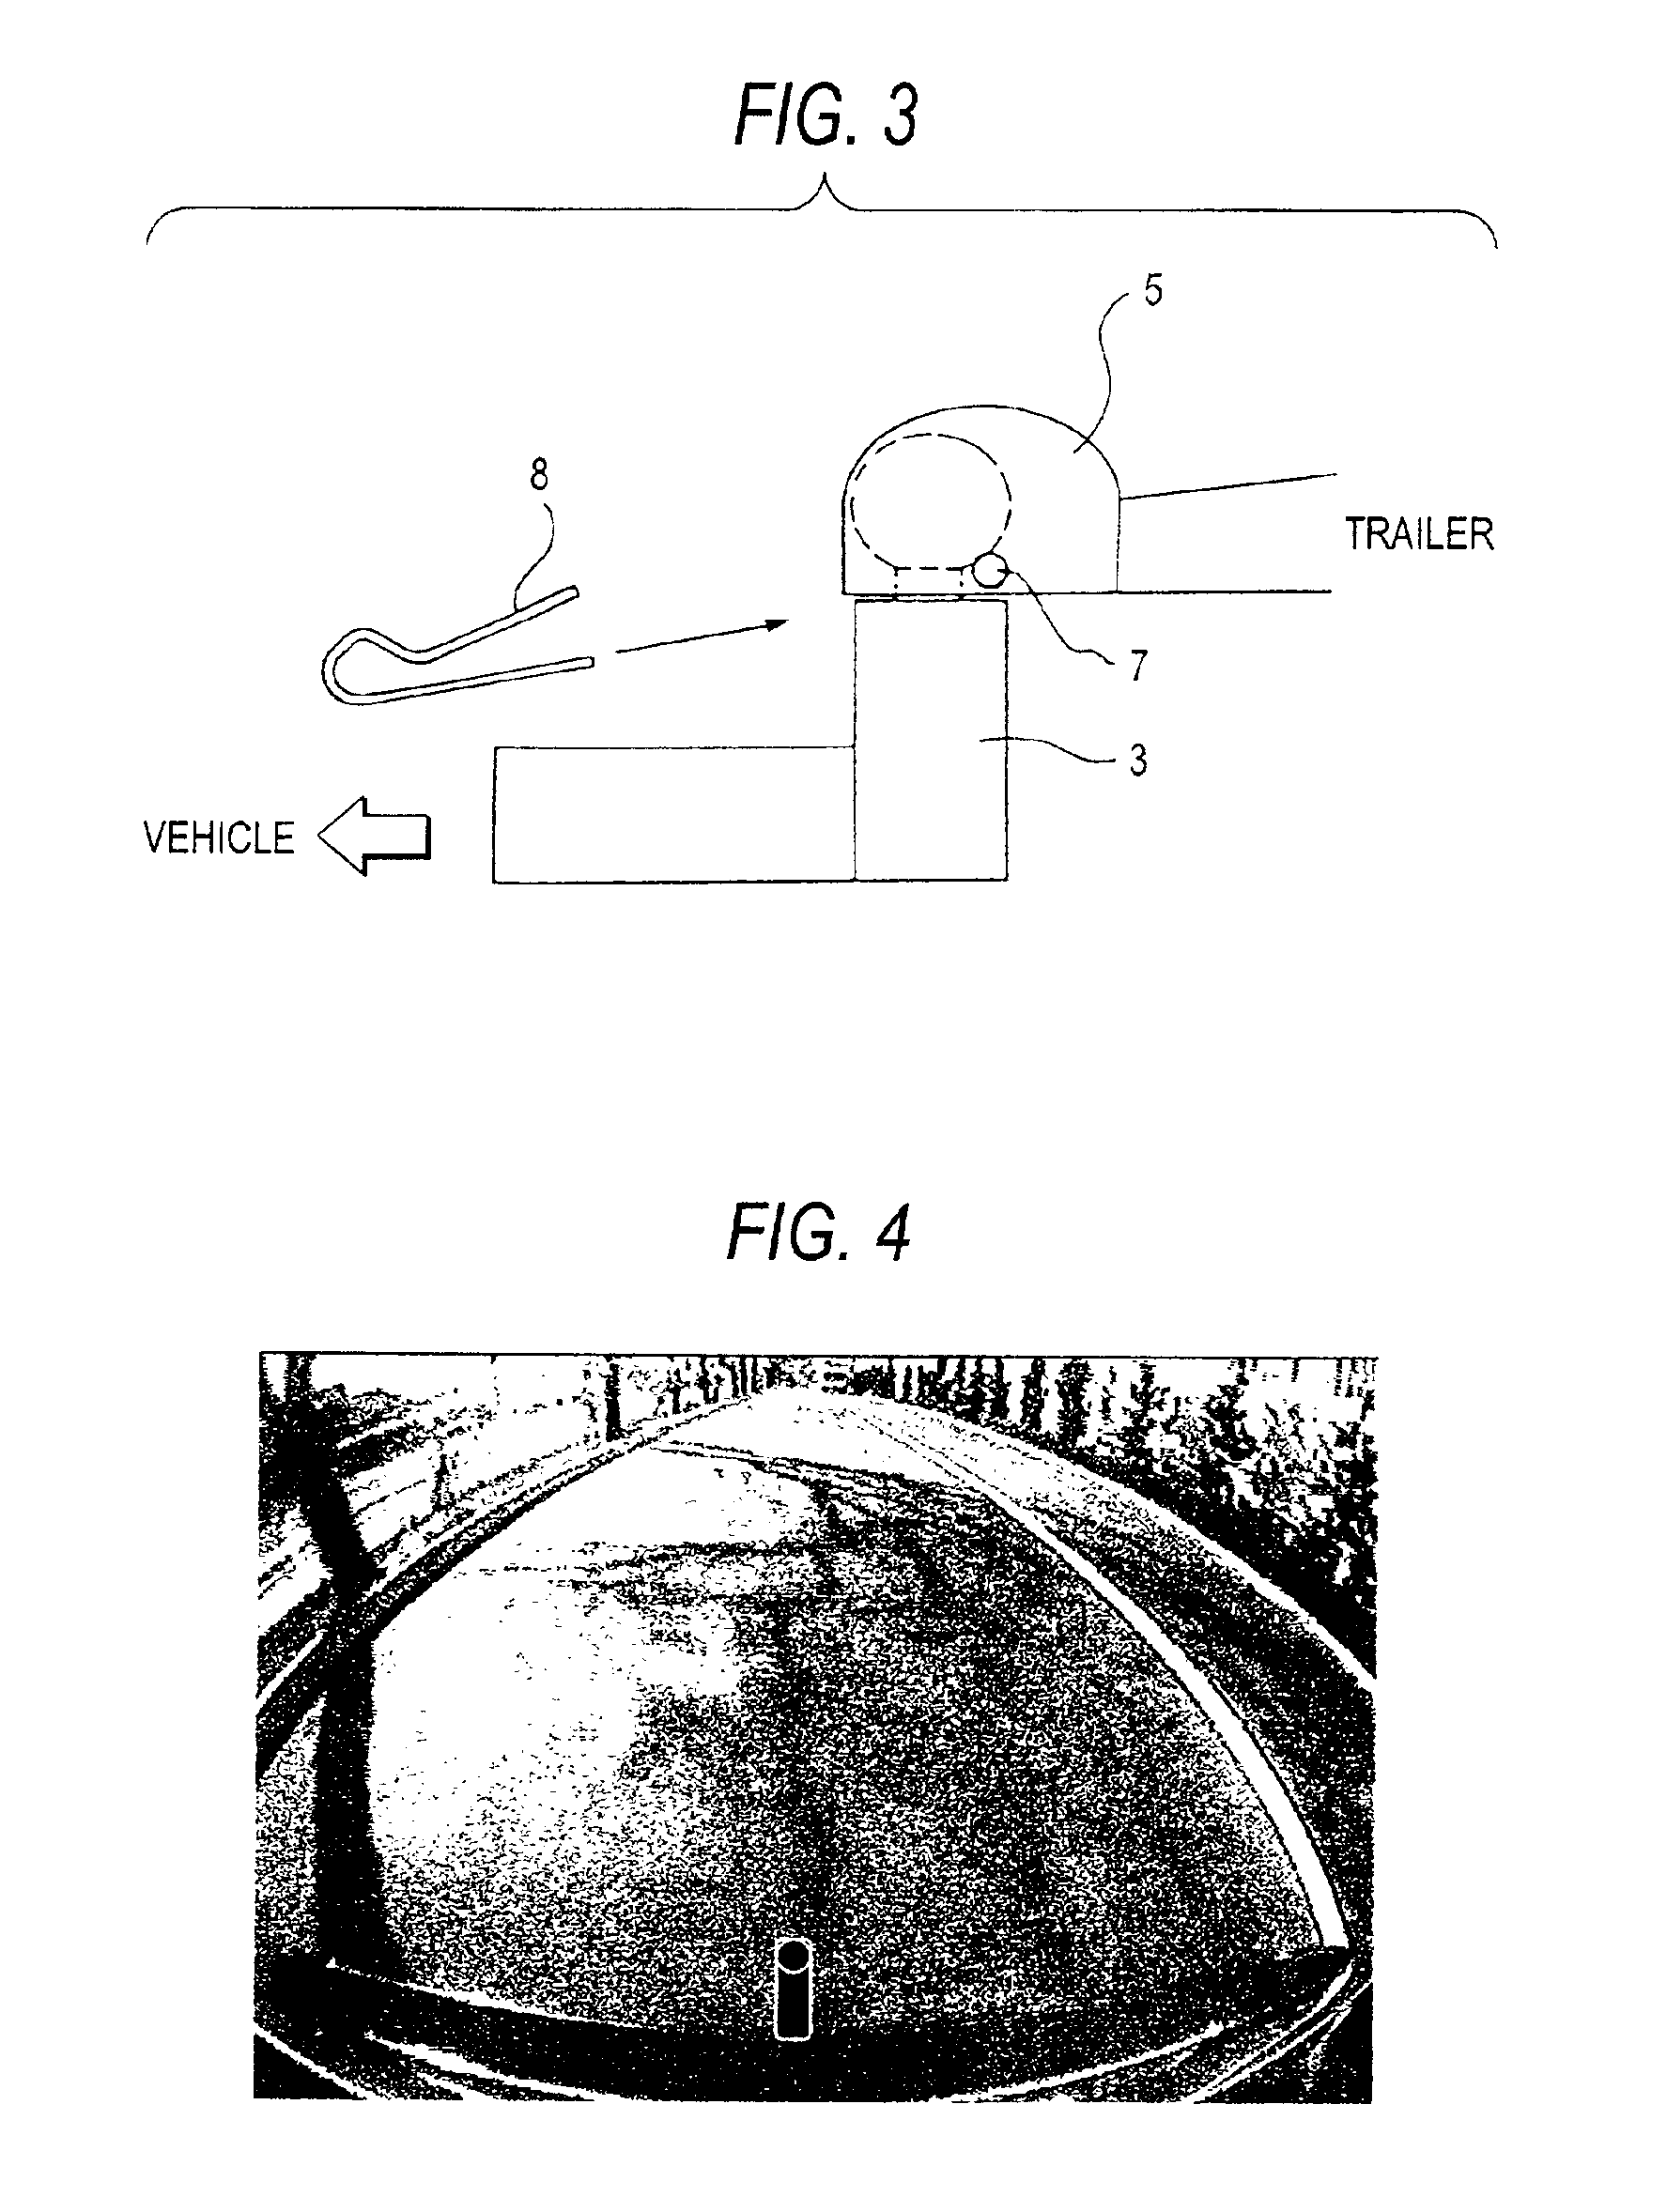 Image display method and apparatus for rearview system